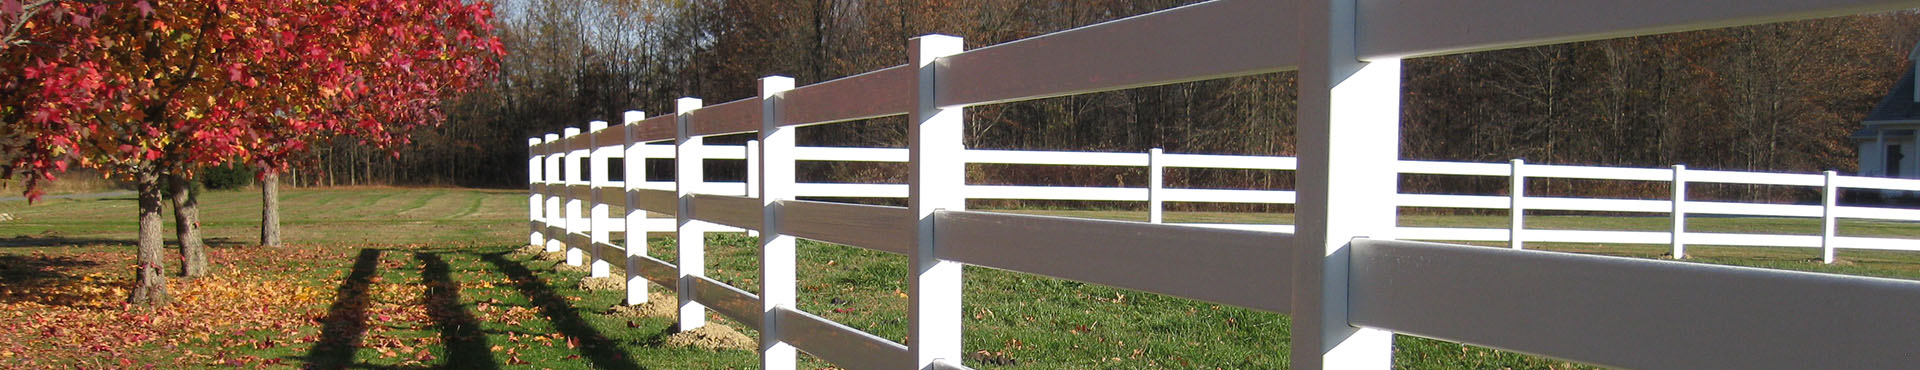 Vinyl Post and Rail Fencing